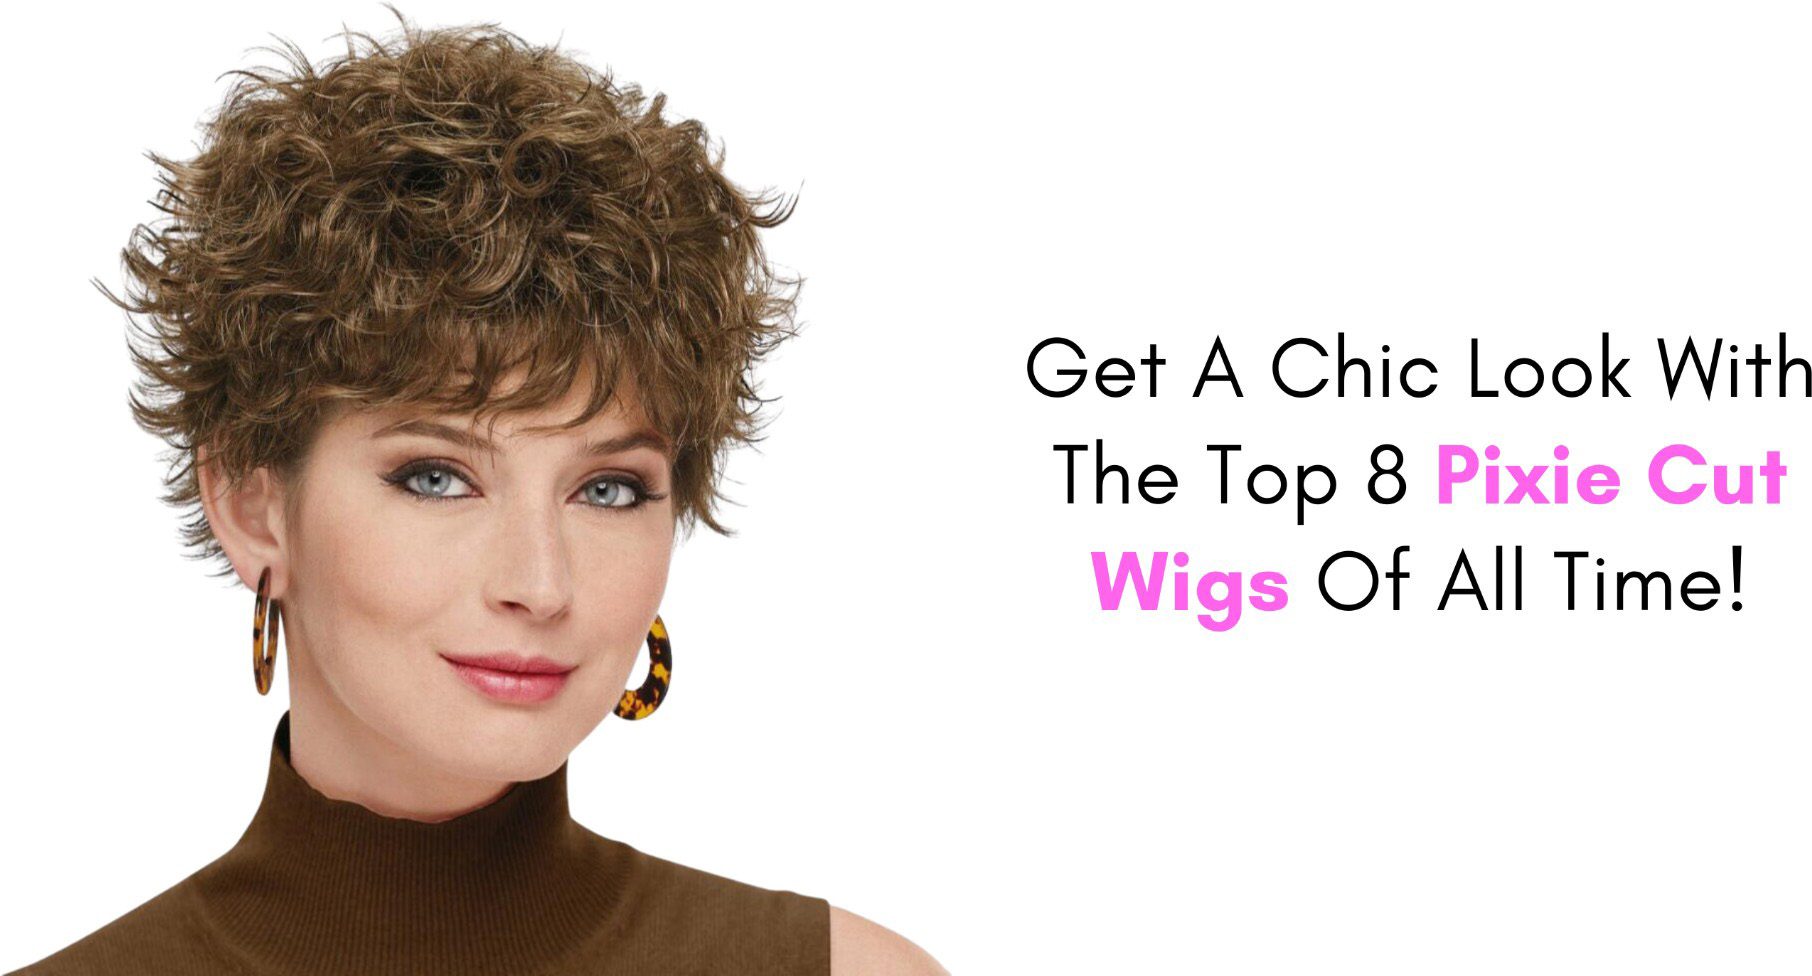 Get A Chic Look With The Top 8 Pixie Cut Wigs Of All Time!